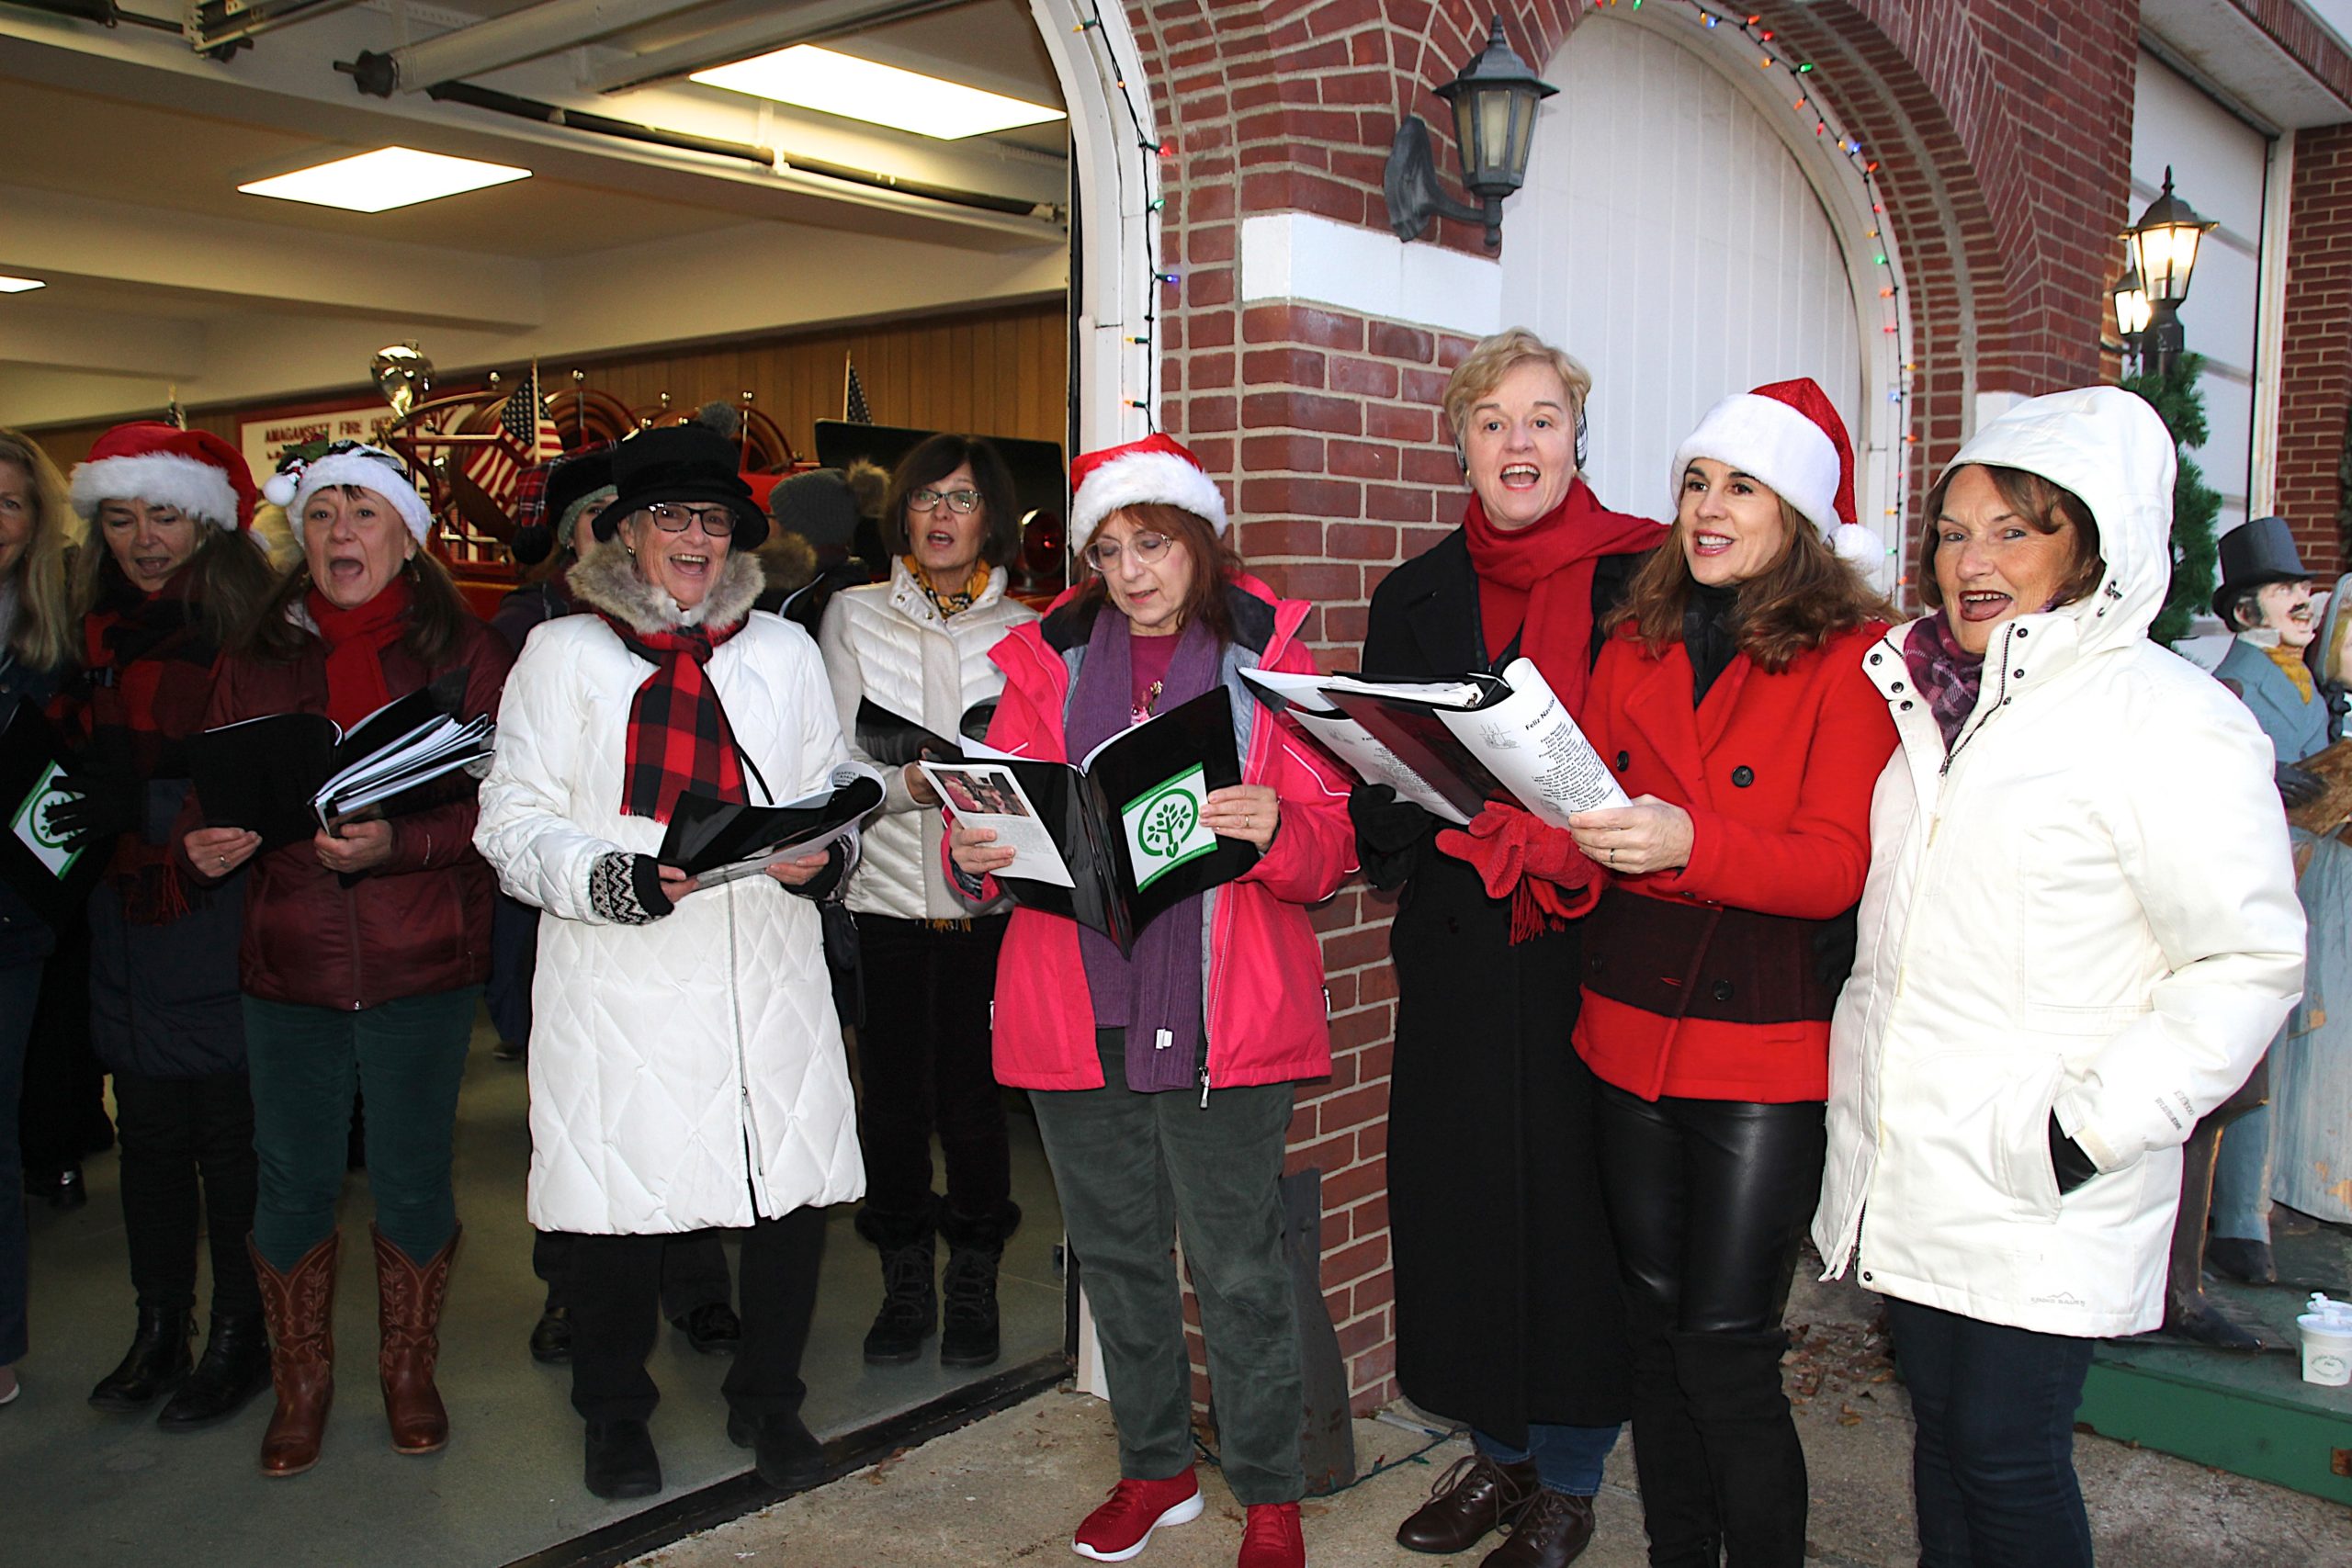 There were carols and cheer at the tree lighting party at the Amagansett Fire Department on Saturday. KYRIL BROMLEY